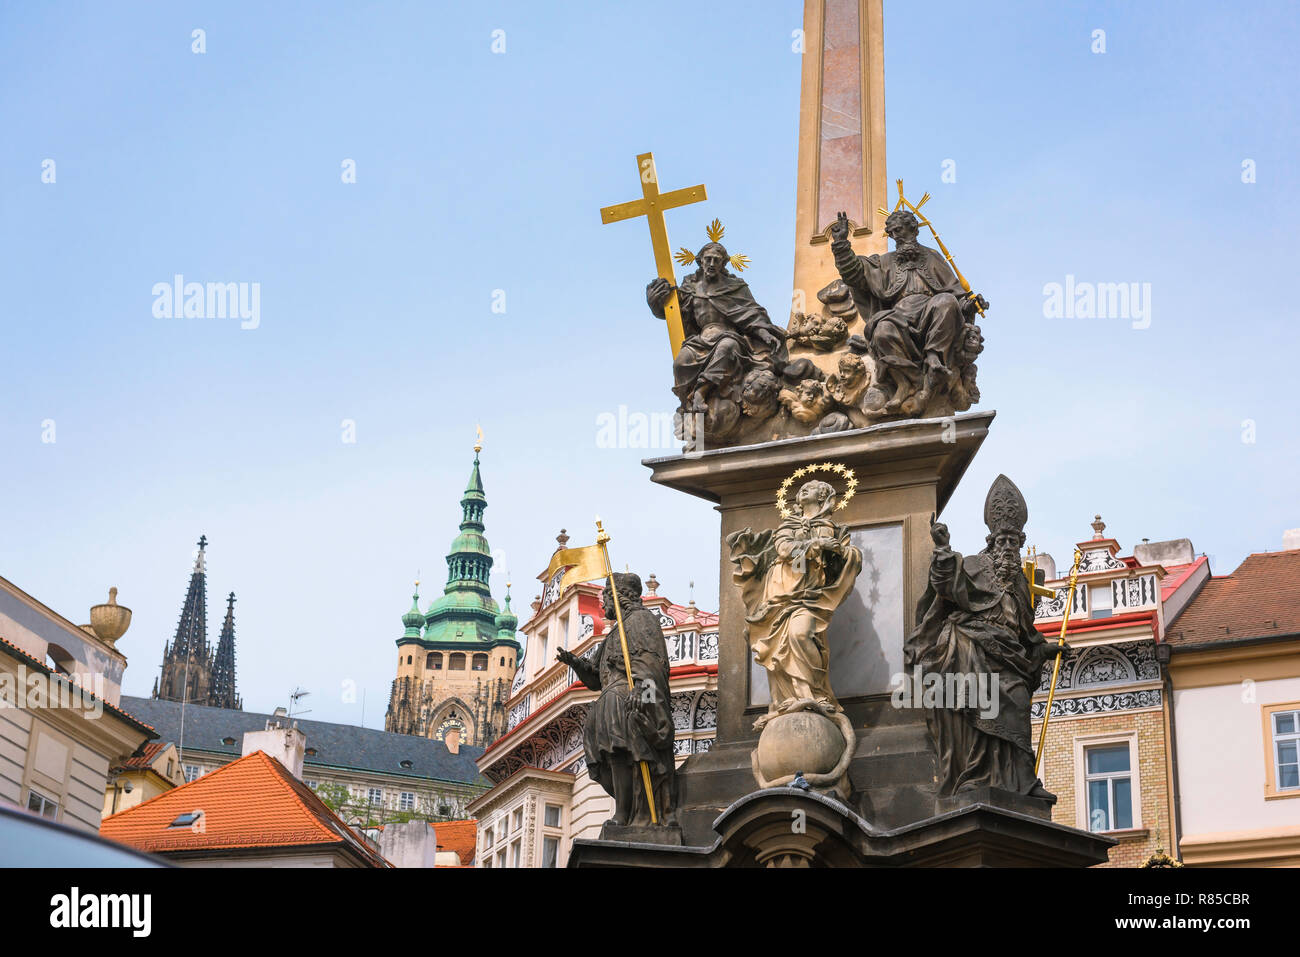 Baroque architecture, view of the 17th century Plague Monument and Baroque buildings sited in Malostranske Namesti in the Mala Strana area of Prague. Stock Photo